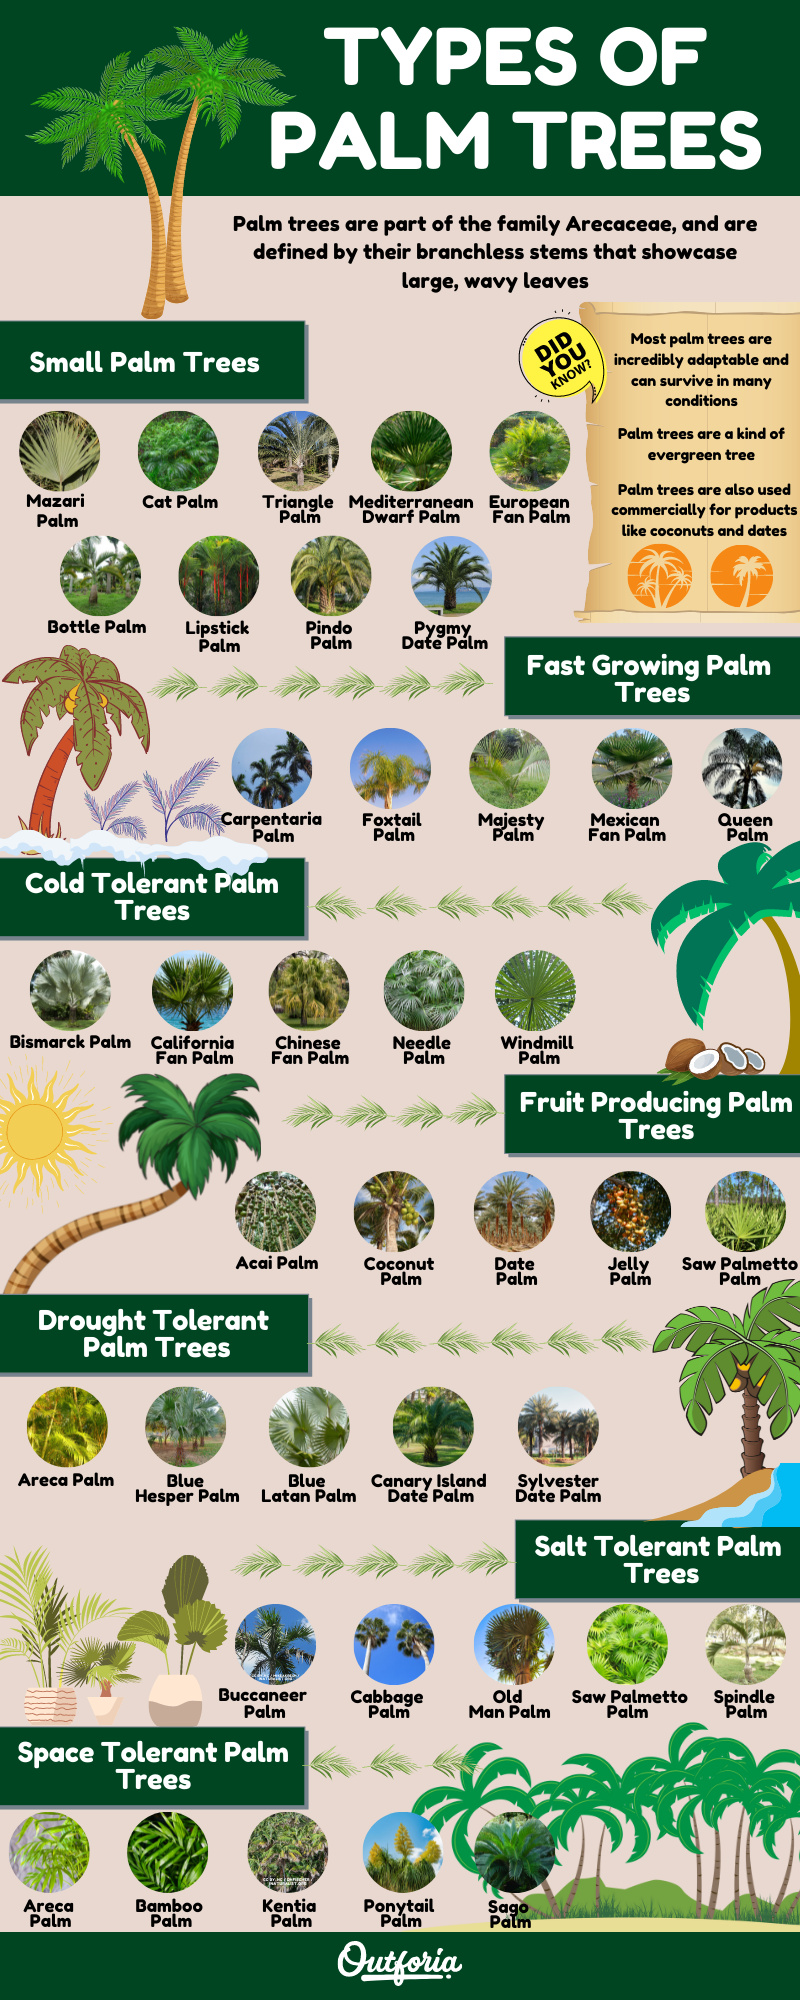 39 types of palm trees: complete identification guide with images